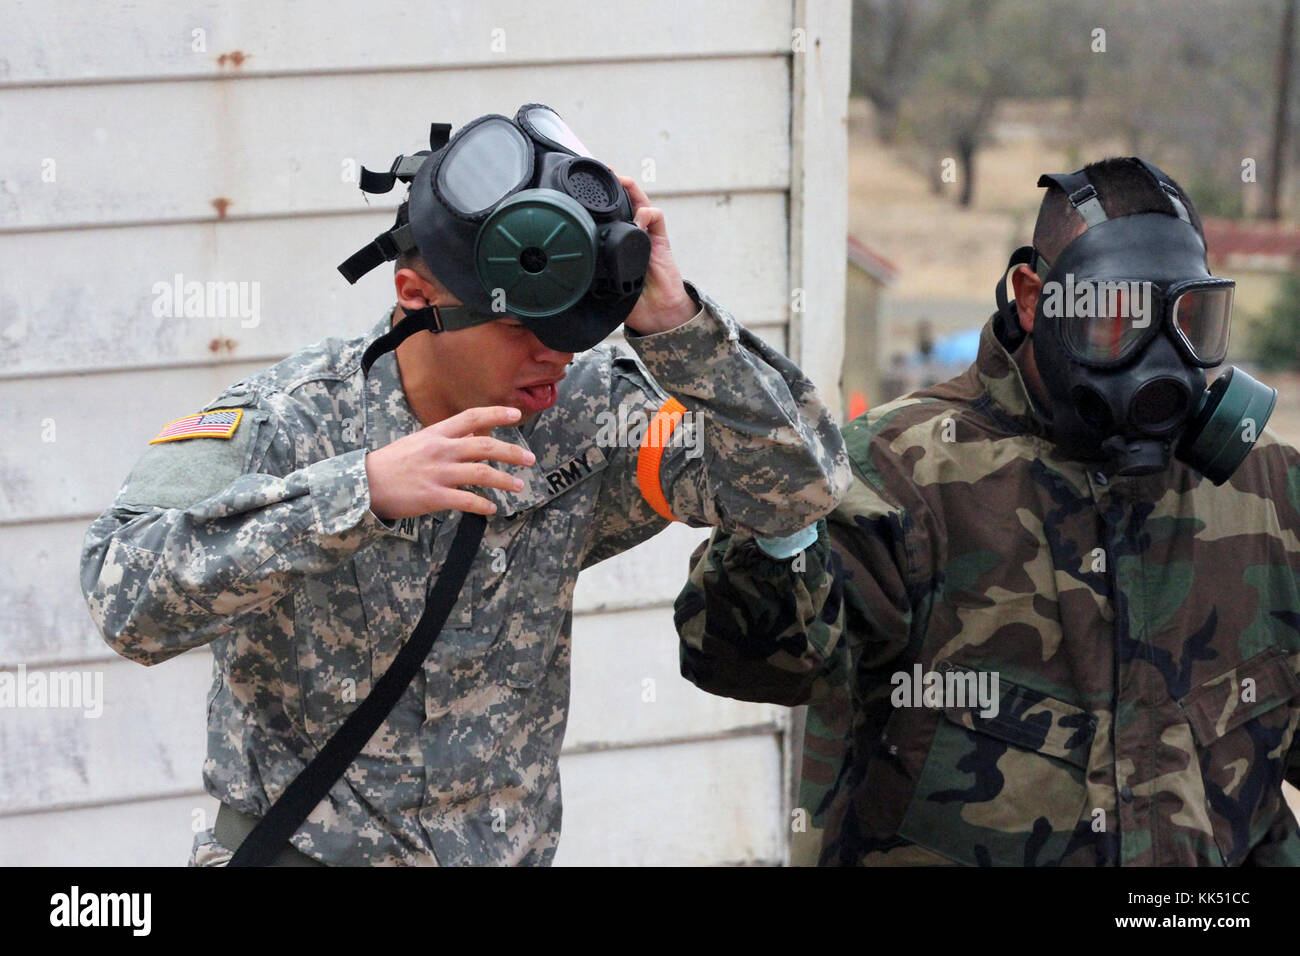 Spc. Fabio Avetisyan, left, coughs and gasps for air Nov. 8 after exiting a gas chamber during the California Army National Guard's 2017-18 Best Warrior Competition at Camp San Luis Obispo, California. This was one of the last tests after four competitive days to find California’s Best of the Best. (Army National Guard photo by Staff Sgt. Eddie Siguenza) Stock Photo